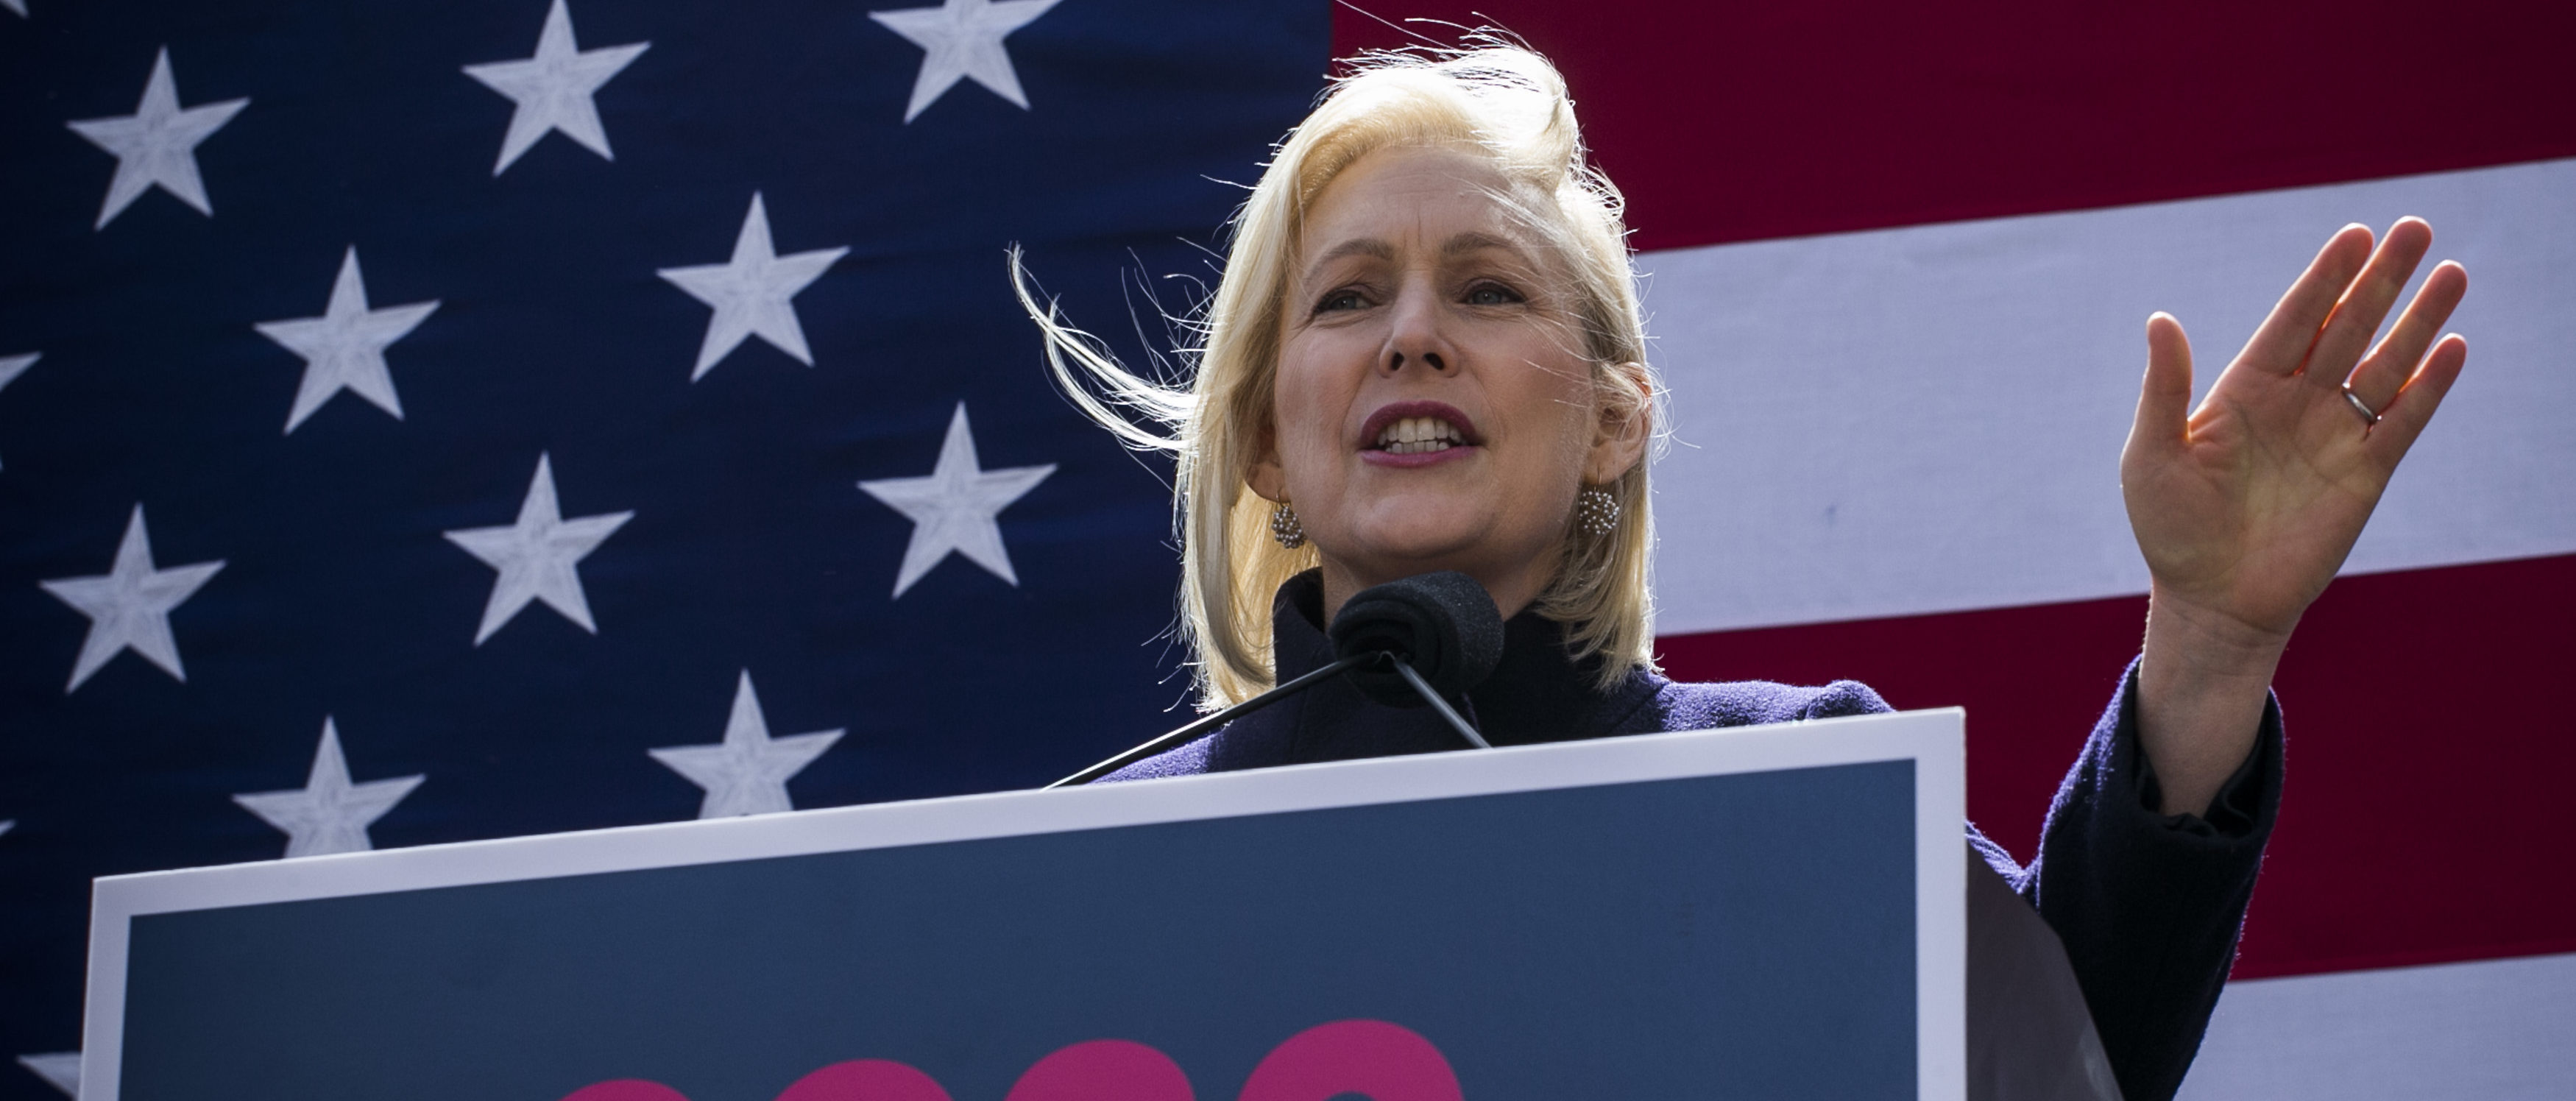 Democratic presidential candidate U.S. Sen. Kirsten Gillibrand speaks during a rally in front of Trump International Hotel & Tower on March 24, 2019 in New York City. (Photo by Kena Betancur/Getty Images)